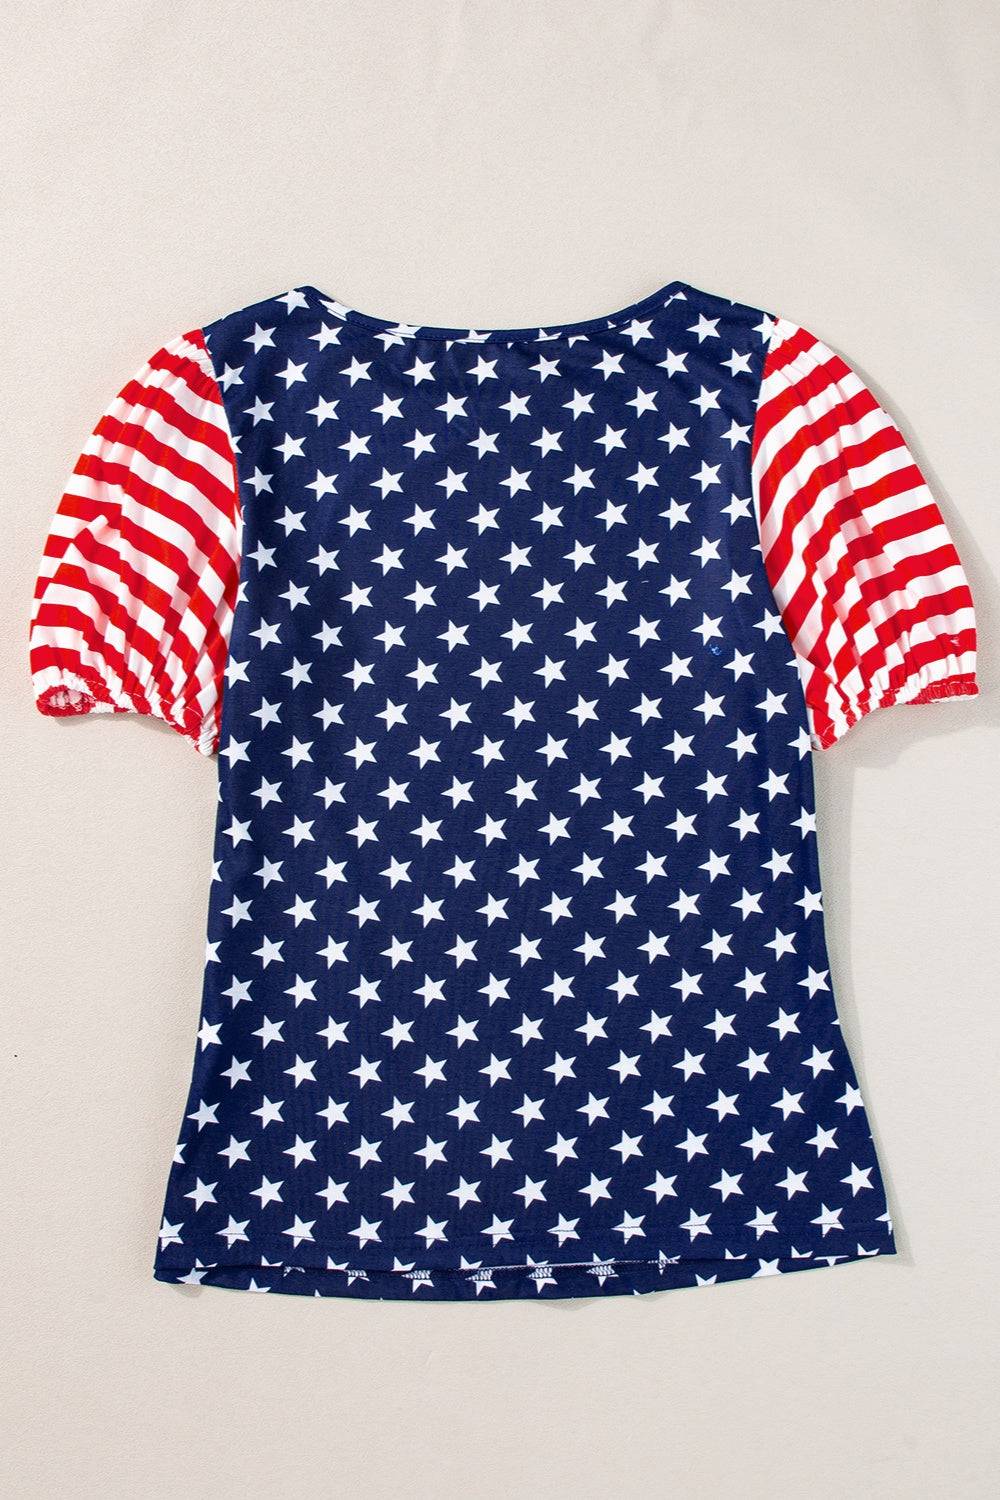 a red, white and blue top with stars on it